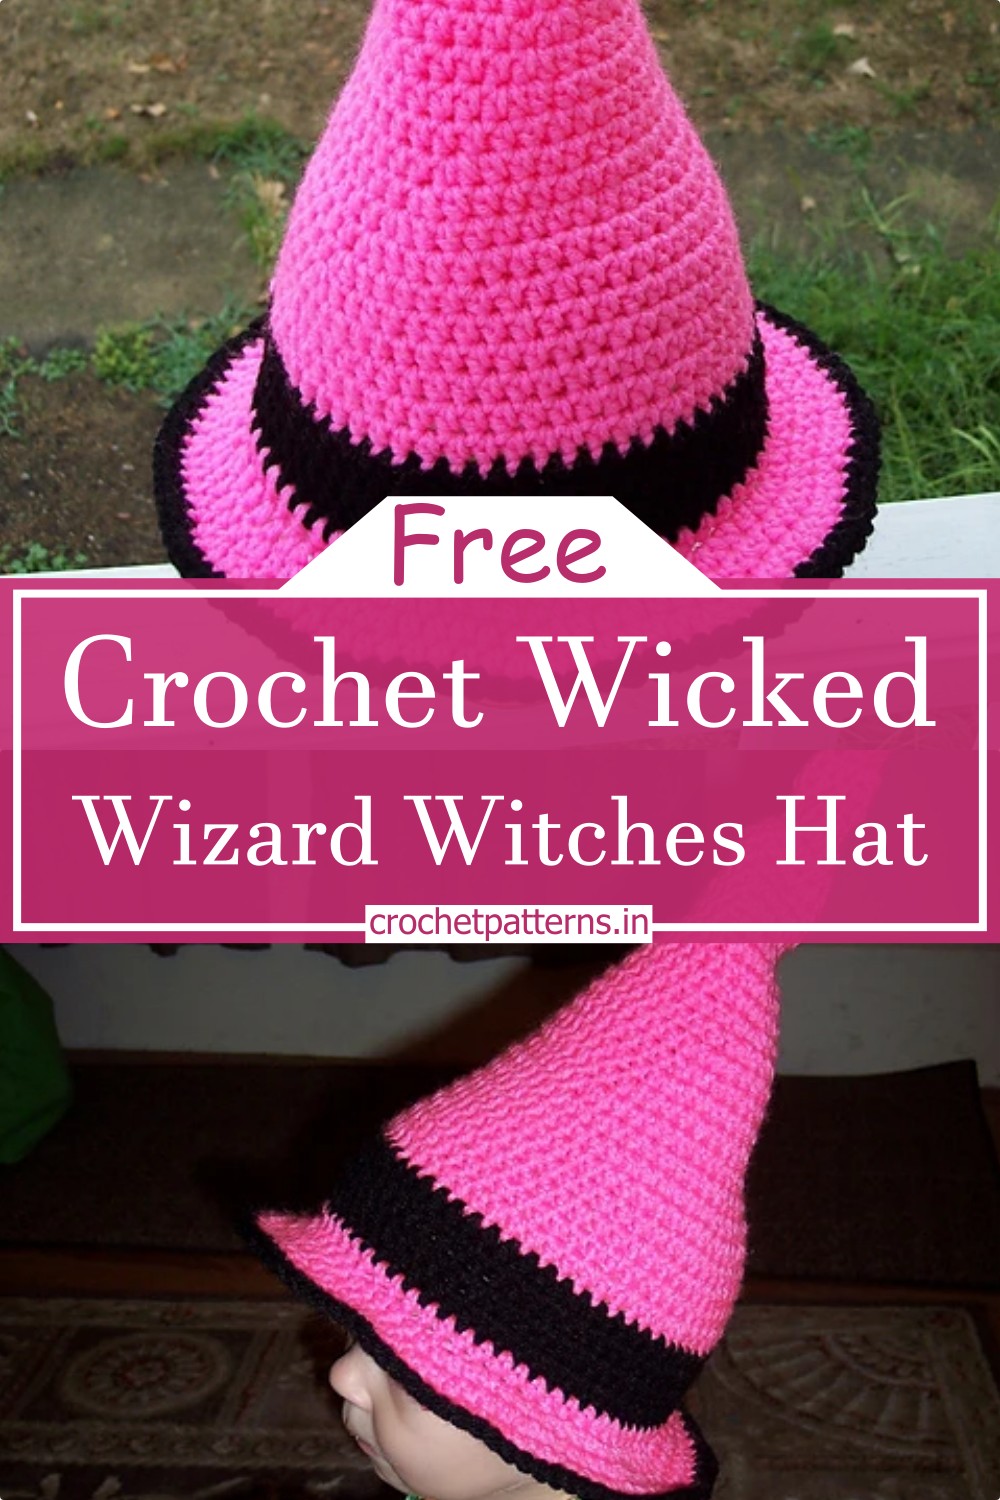 Wicked Wizard Witches Hat